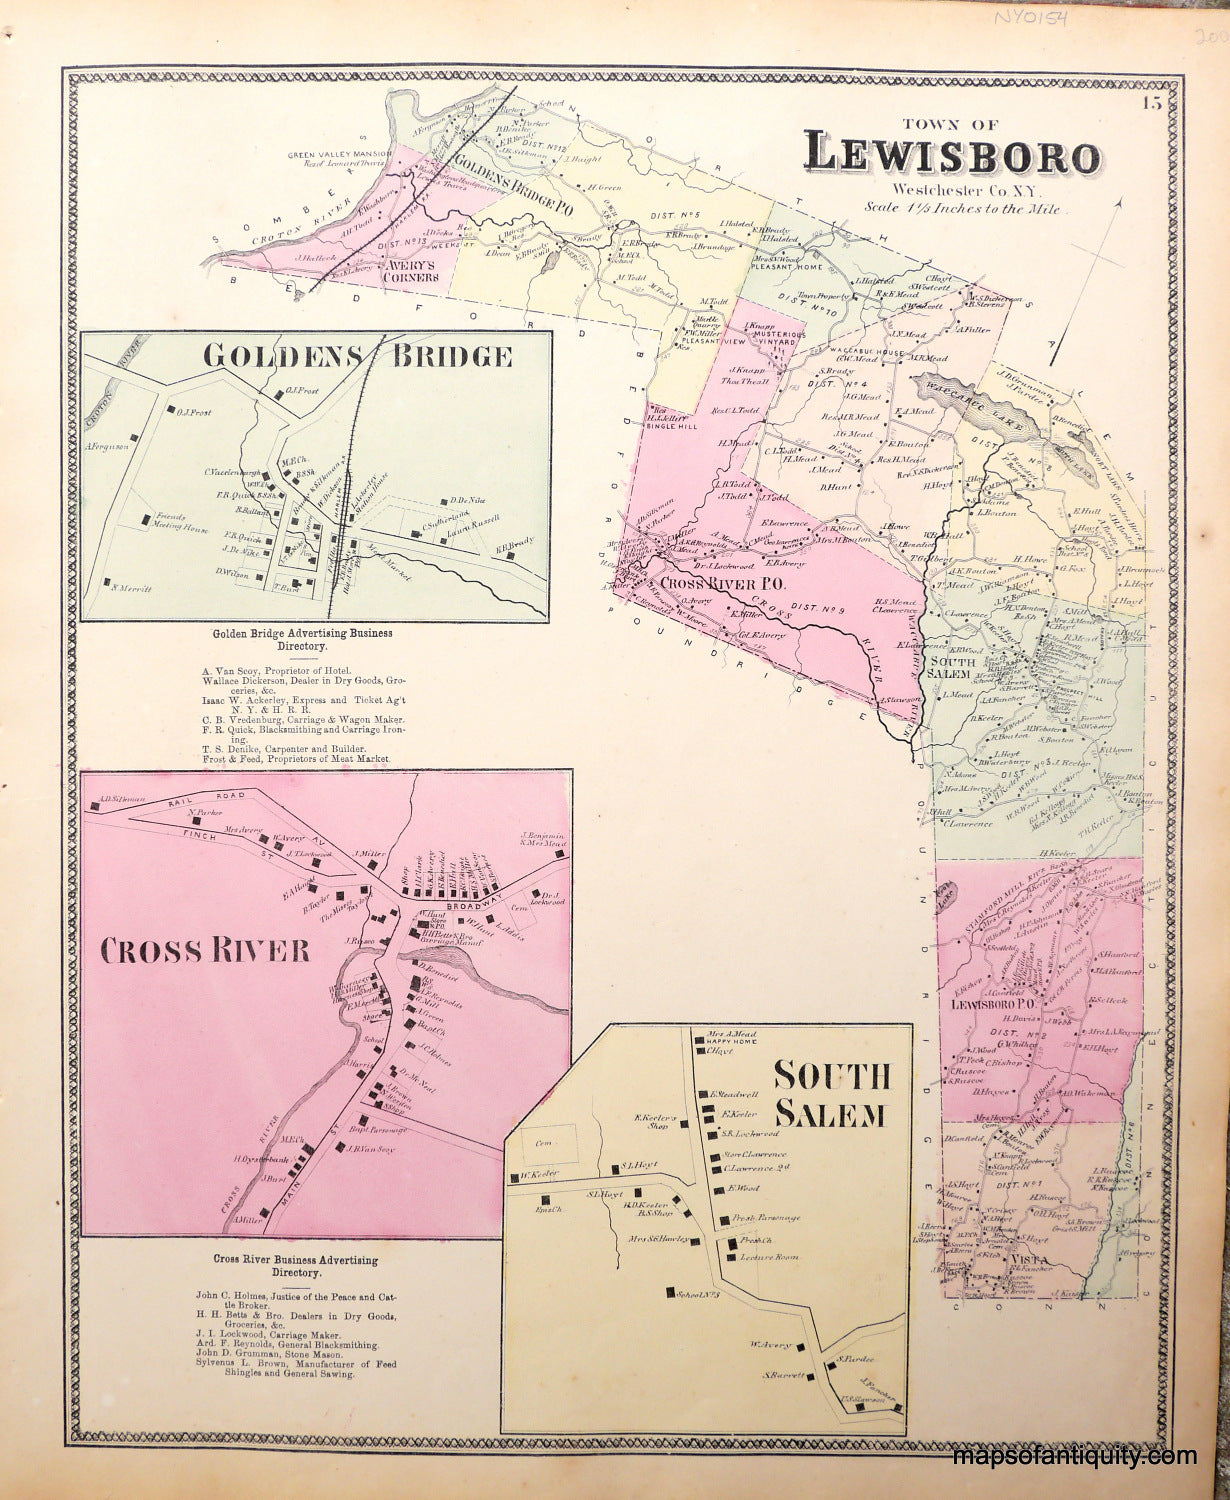 Antique-Hand-Colored-Map-Town-of-Lewisboro-Westchester-Co.-N.Y.-(with-insets-of-Goldens-Bridge-Cross-River-and-South-Salem)-United-States-Northeast-1867-Beers-Maps-Of-Antiquity